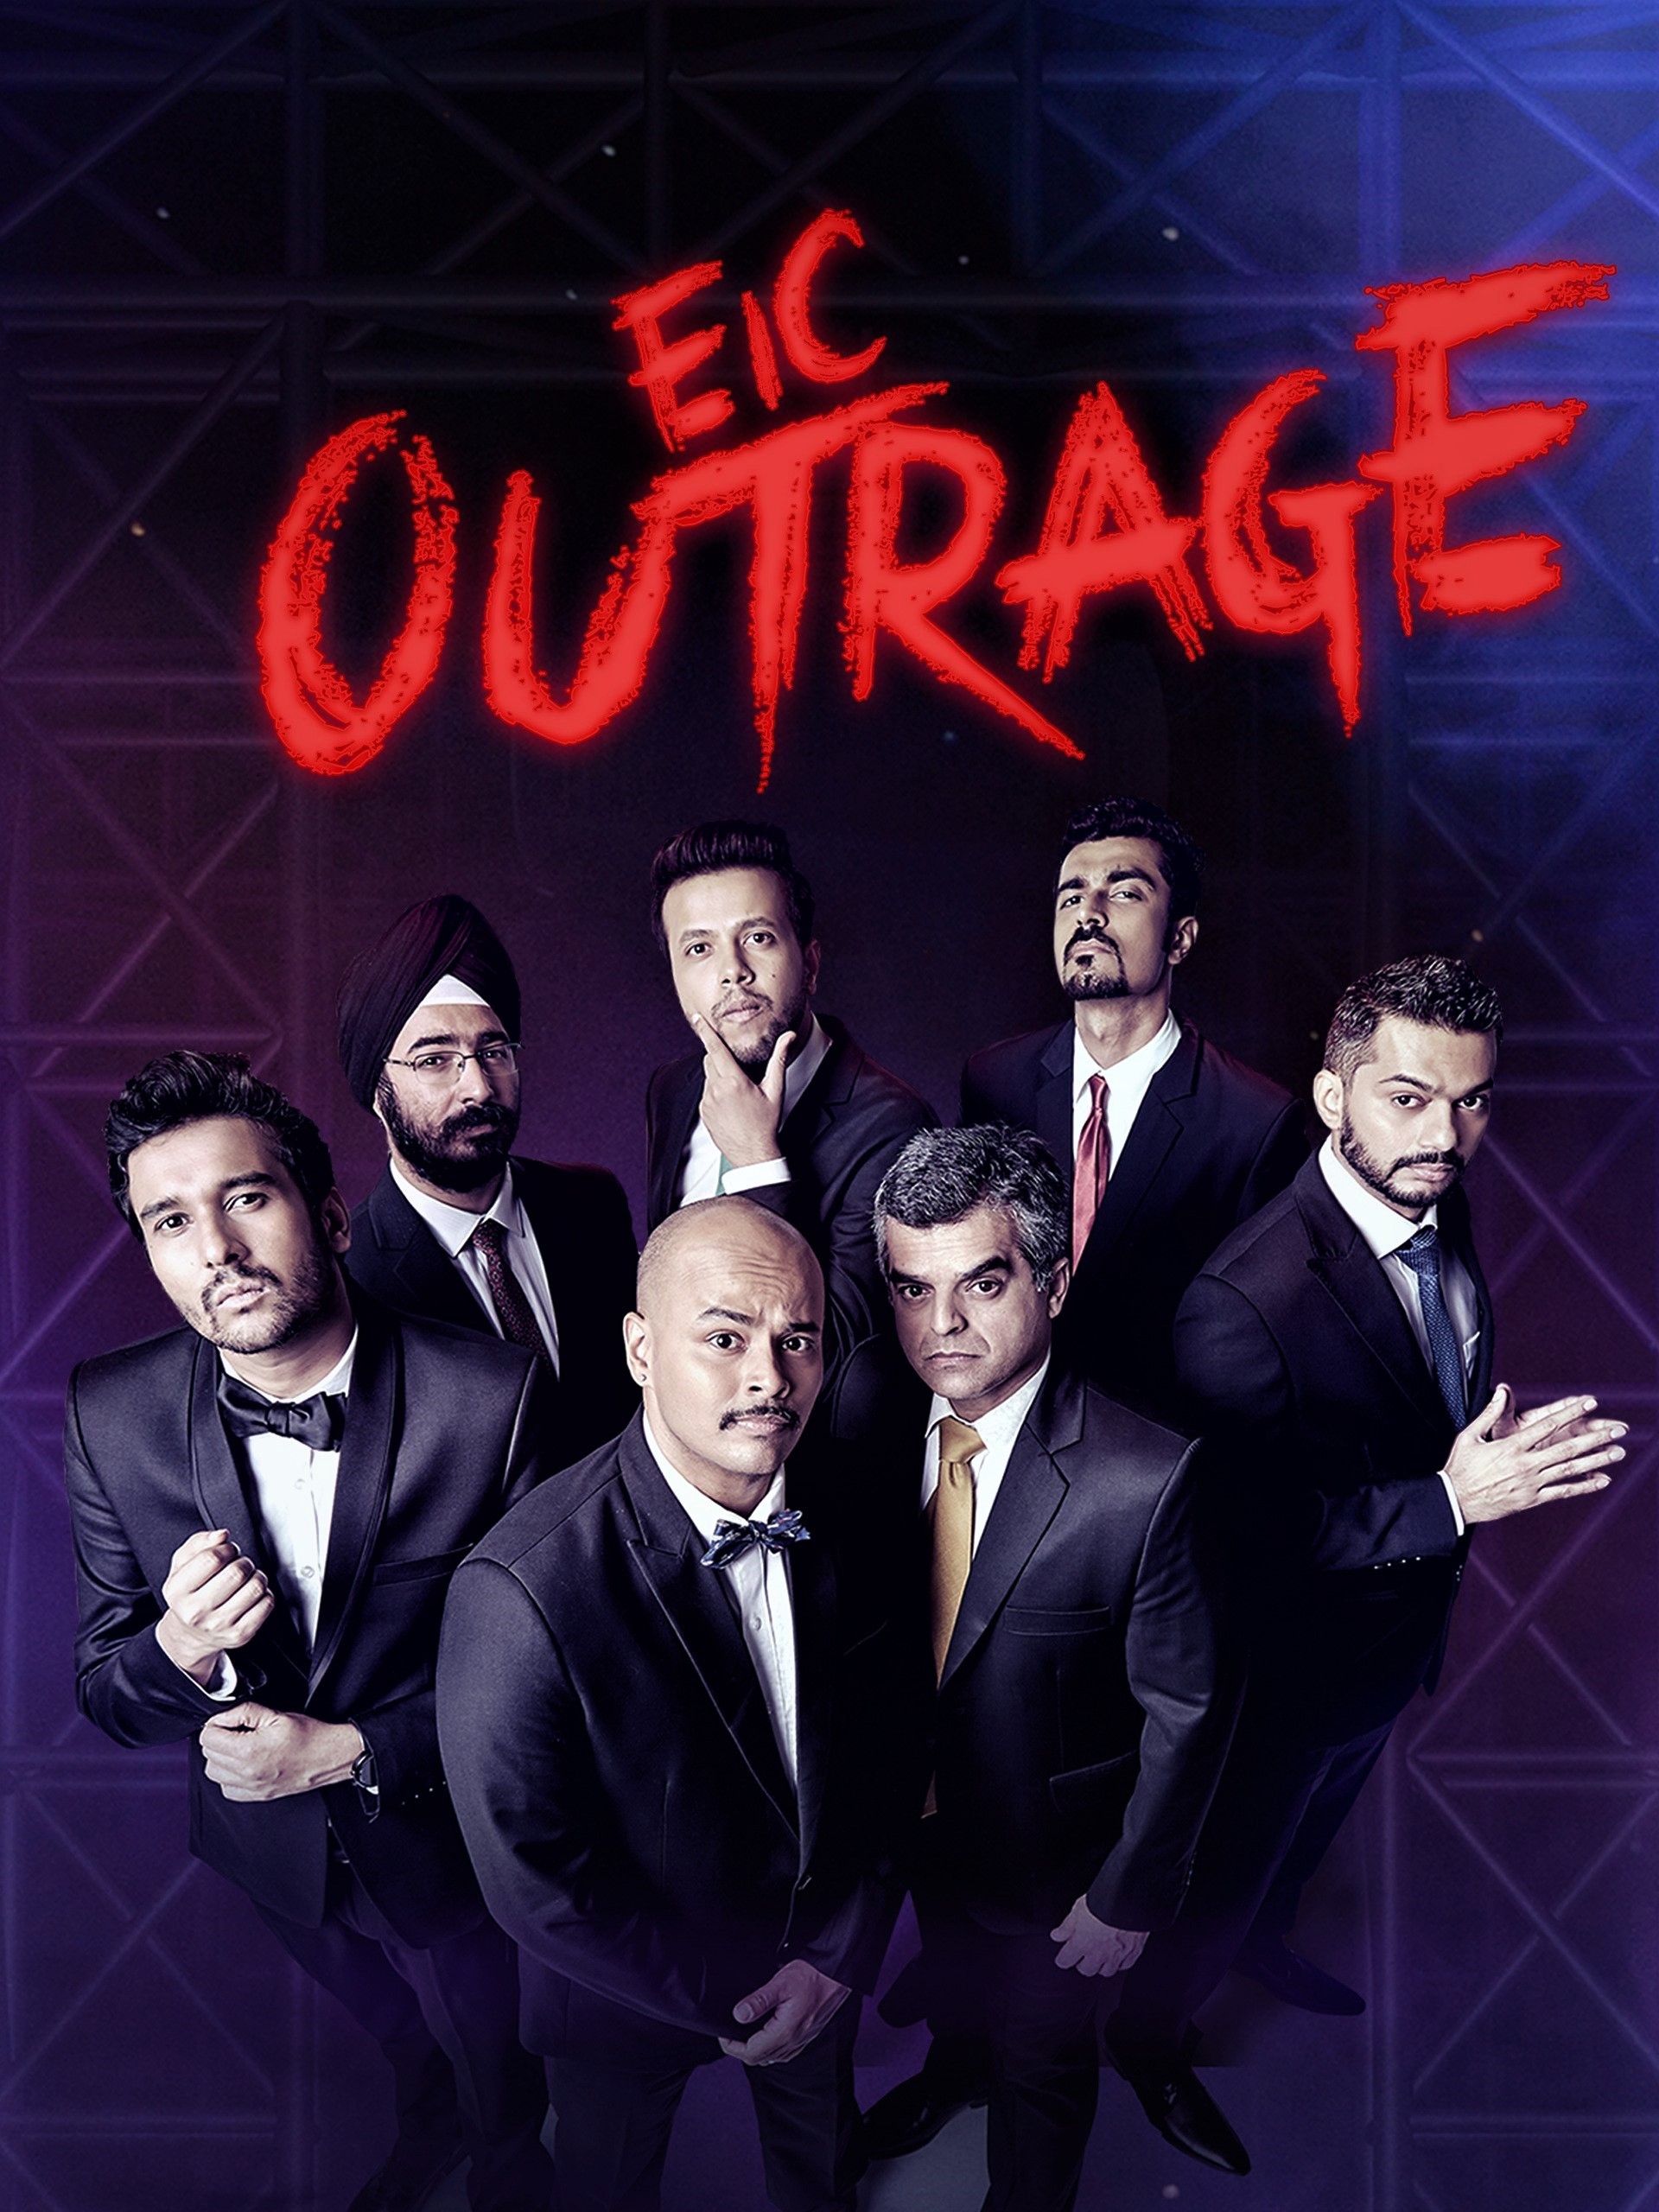 EIC: Outrage Live